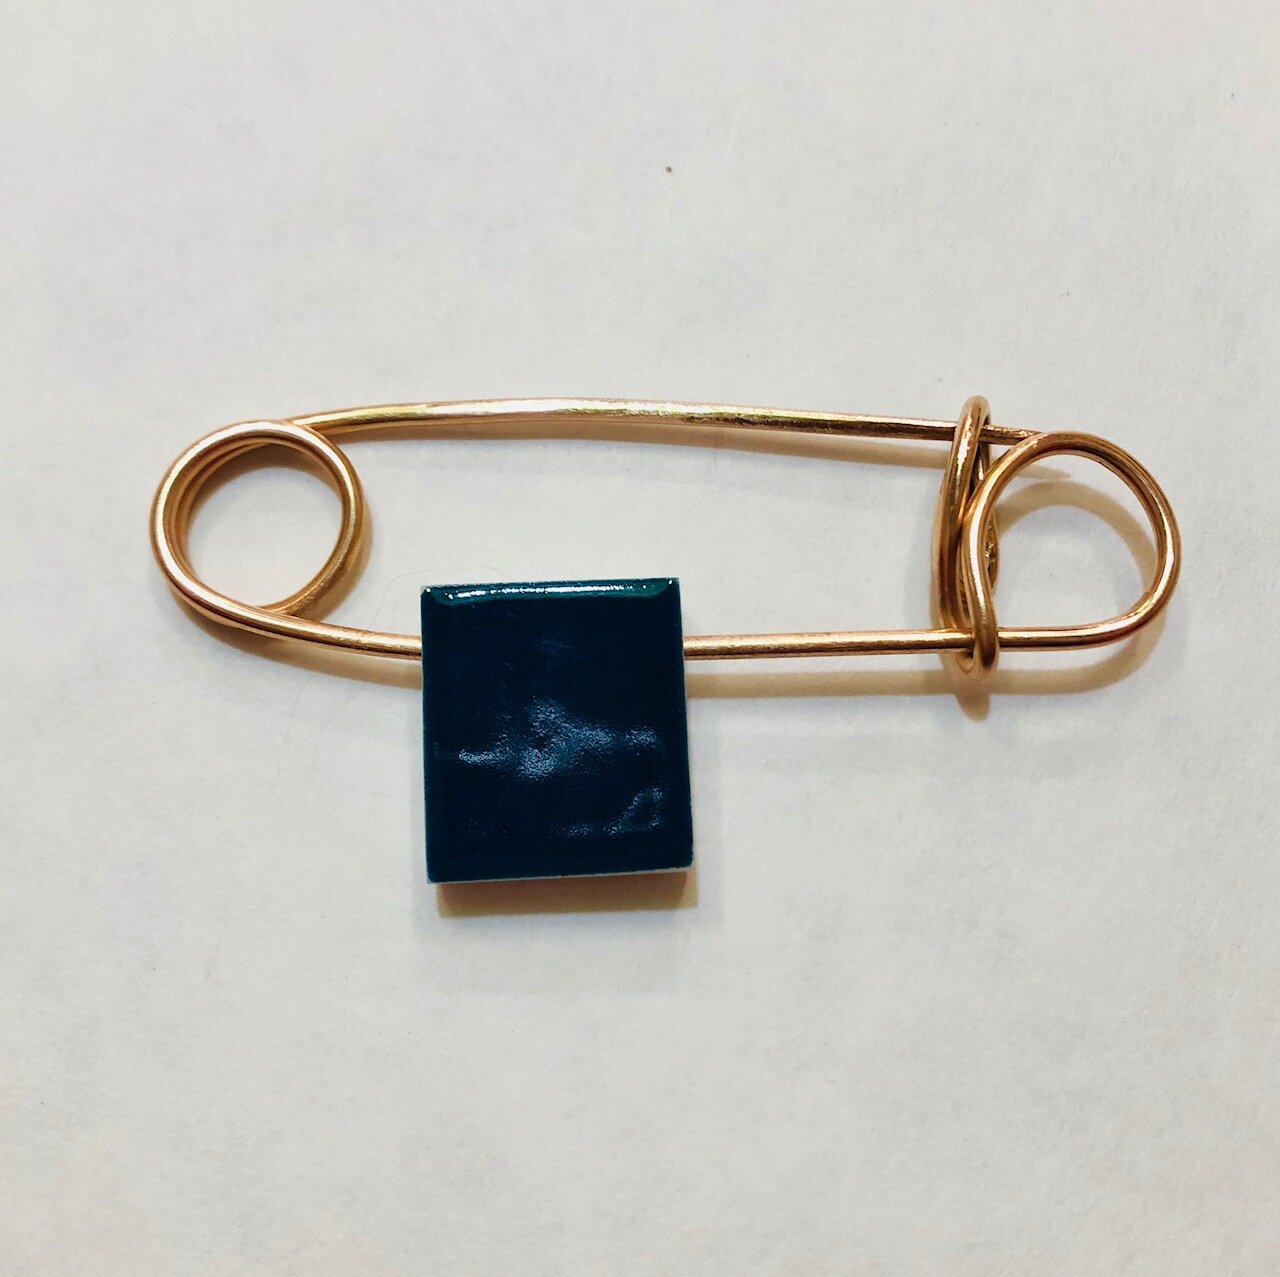 Bronze Safety Pin with Teal Charm, 2018